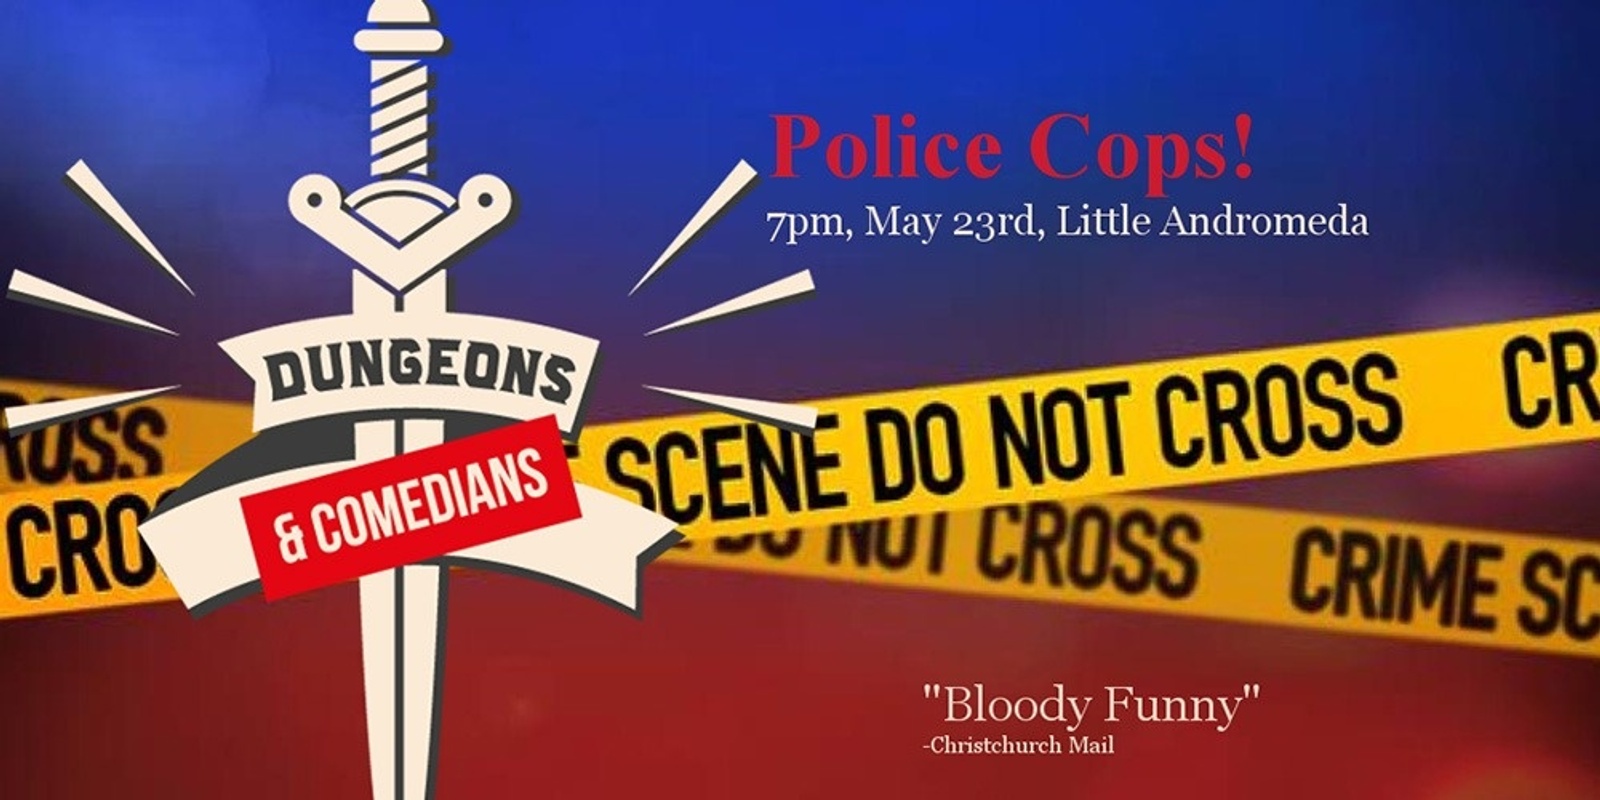 Banner image for Dungeons & Comedians: Police Cops!